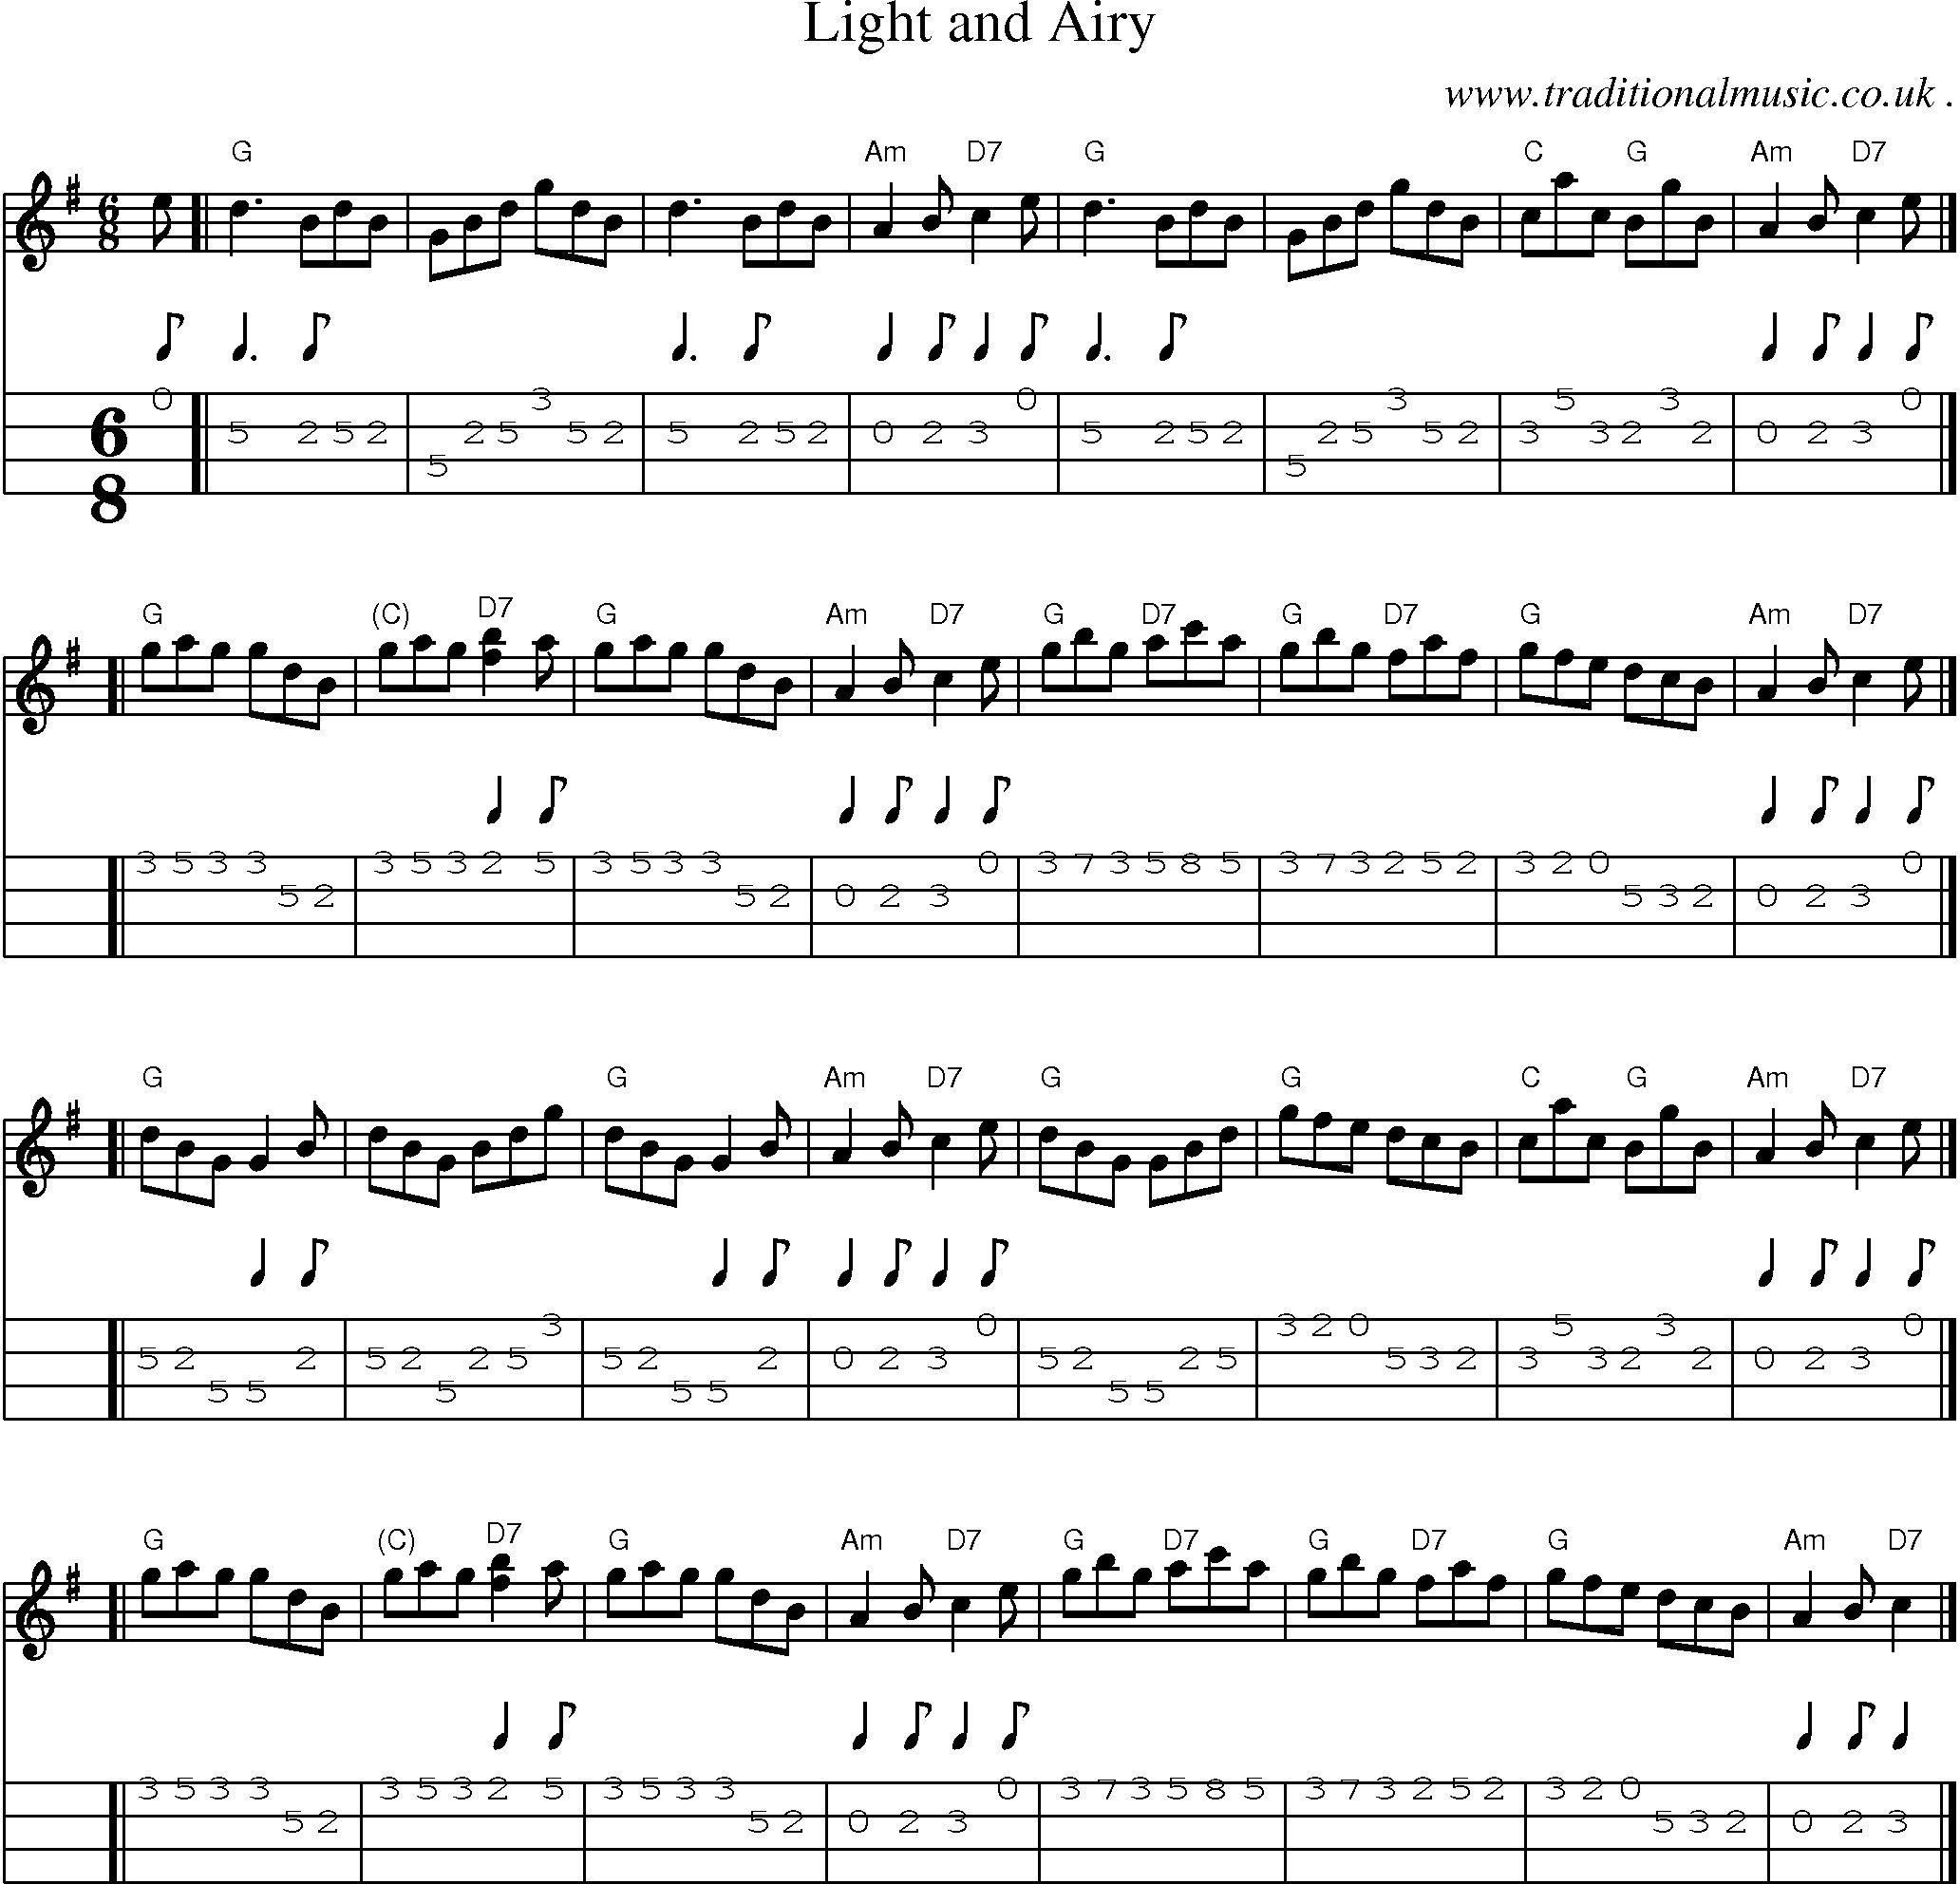 Sheet-music  score, Chords and Mandolin Tabs for Light And Airy